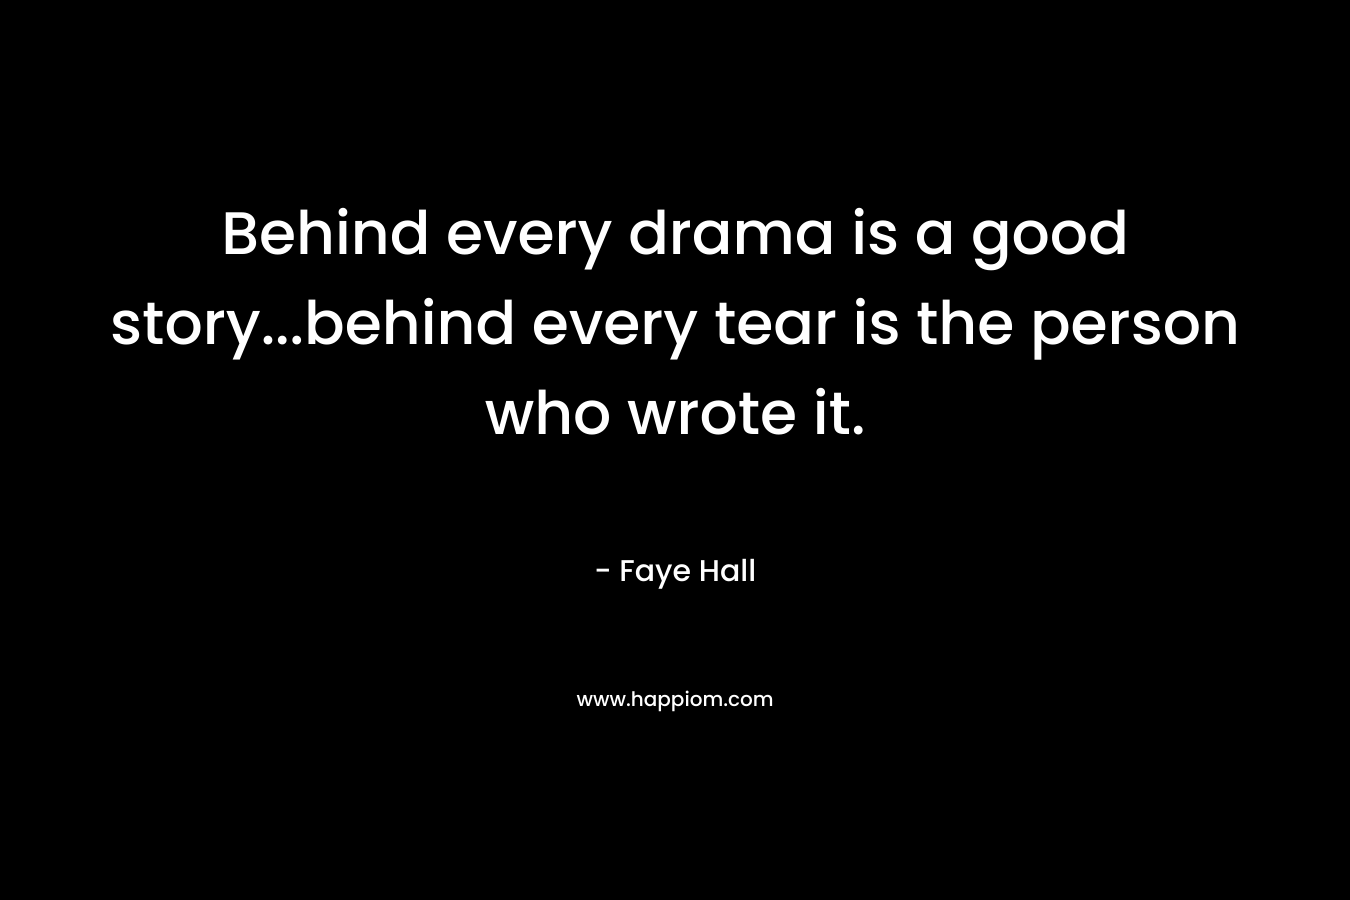 Behind every drama is a good story…behind every tear is the person who wrote it. – Faye Hall